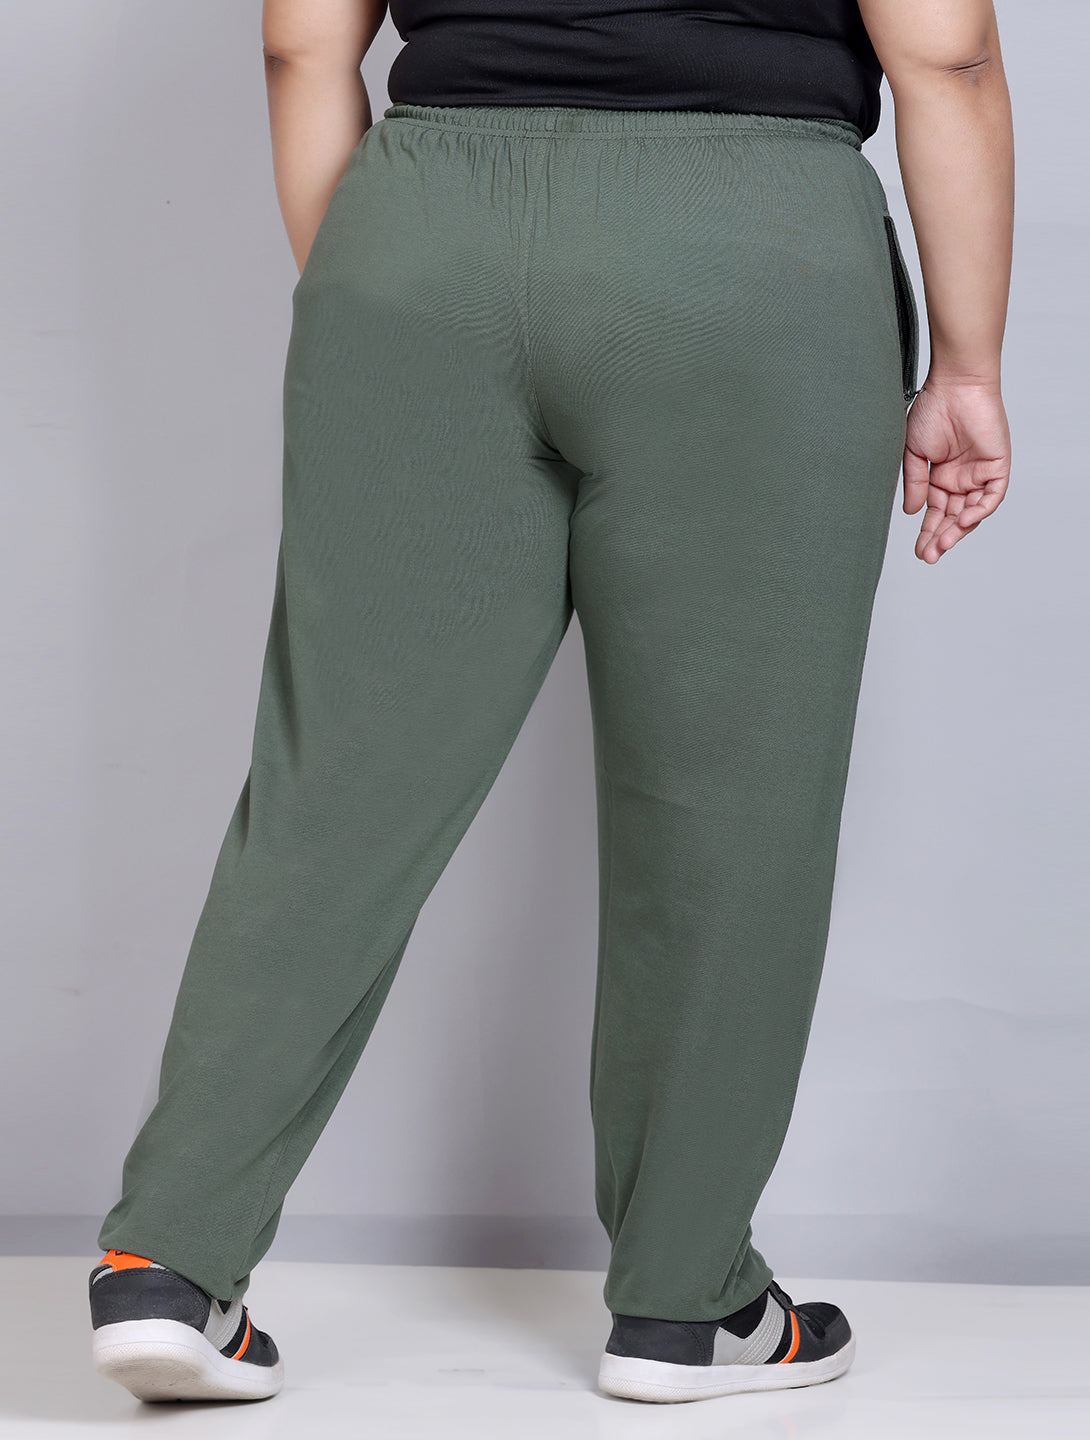 Comfy Green Cotton Track Pants For Women At Best Prices